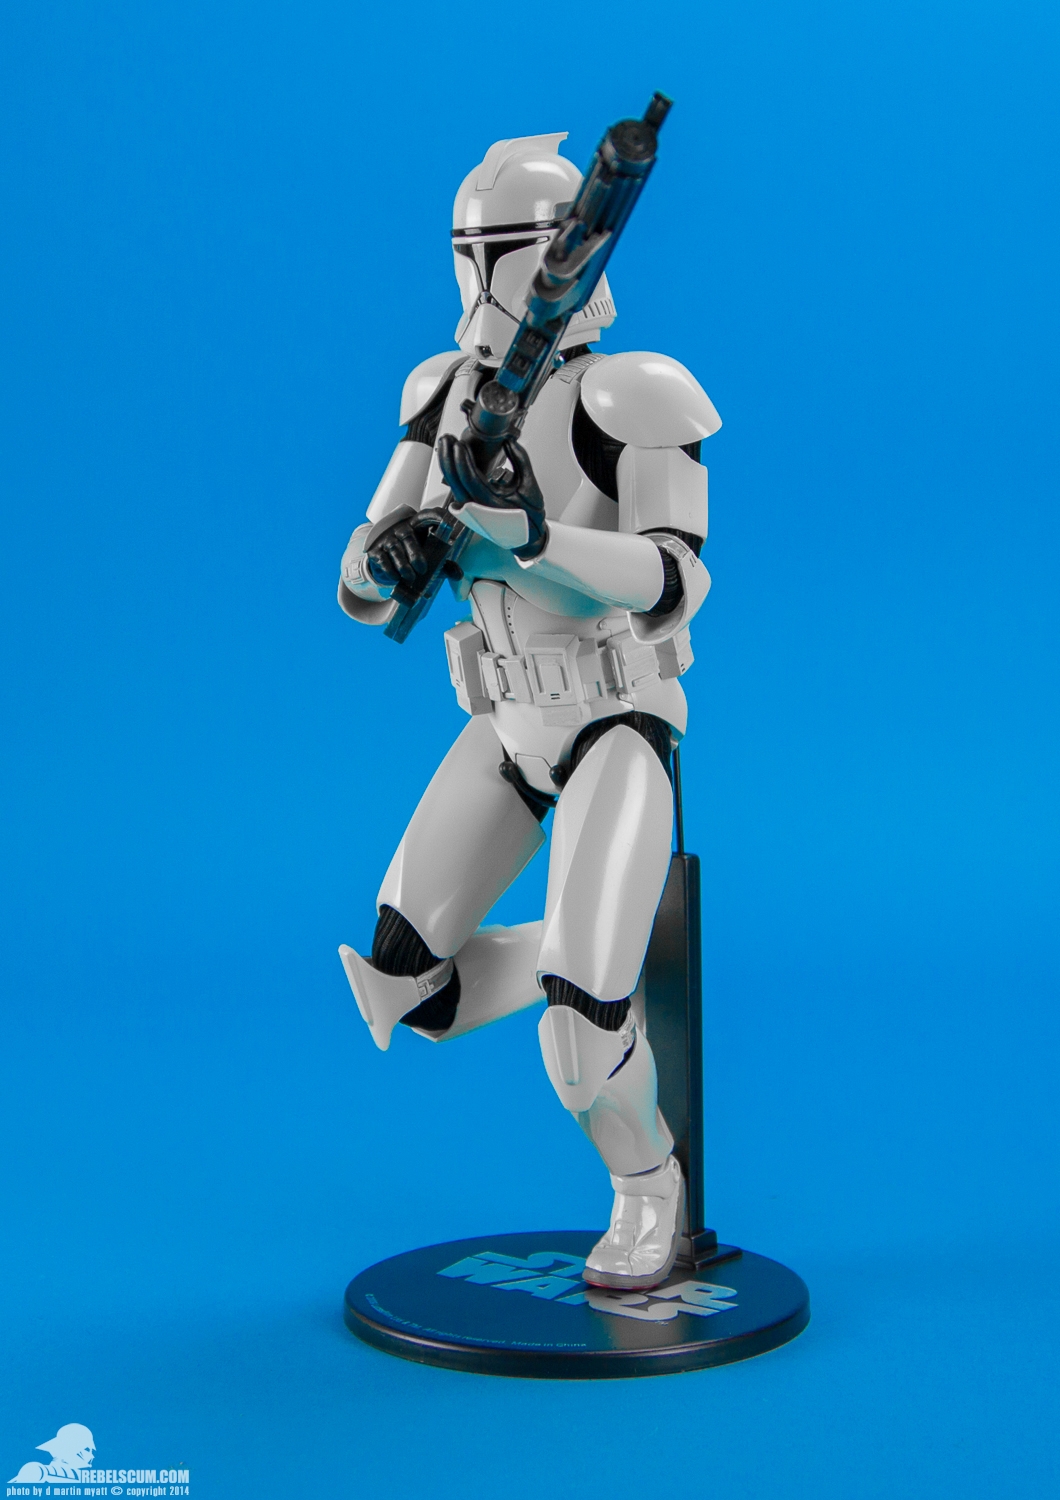 Shiny-Clone-Trooper-Deluxe-Sixth-Scale-Figure-Sideshow-016.jpg